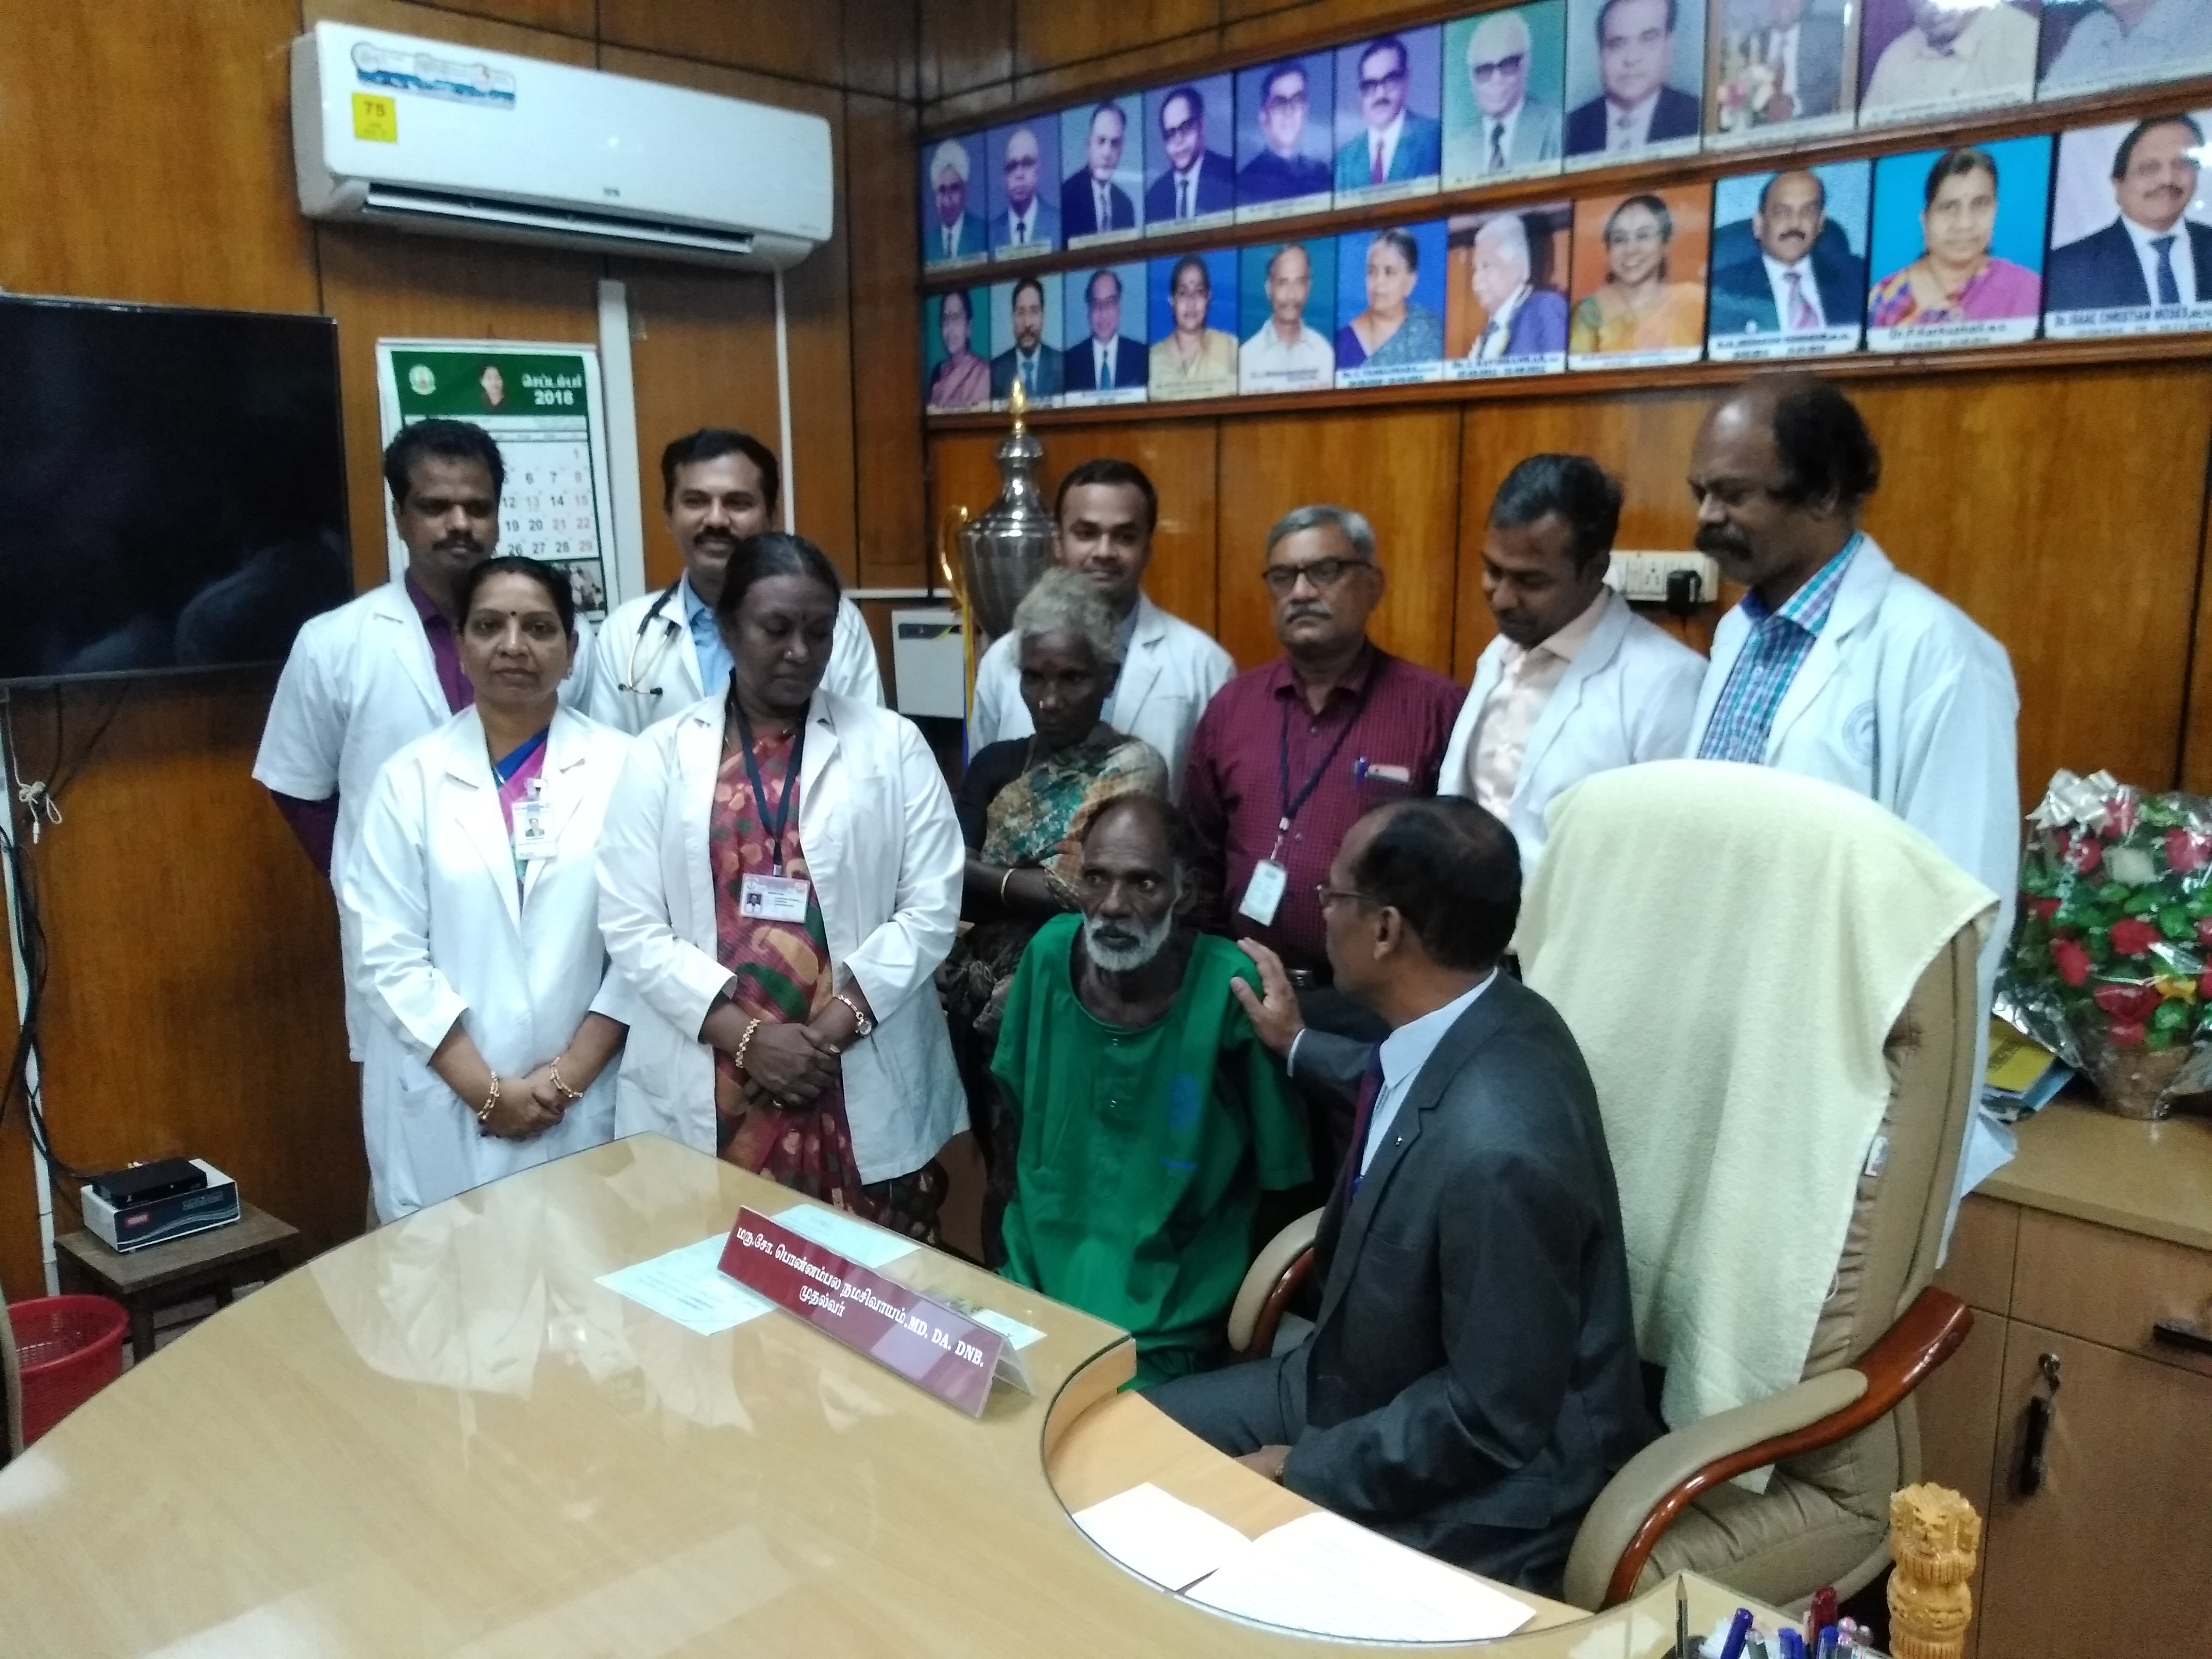 doctors of Stanley hosp. give new life to patient